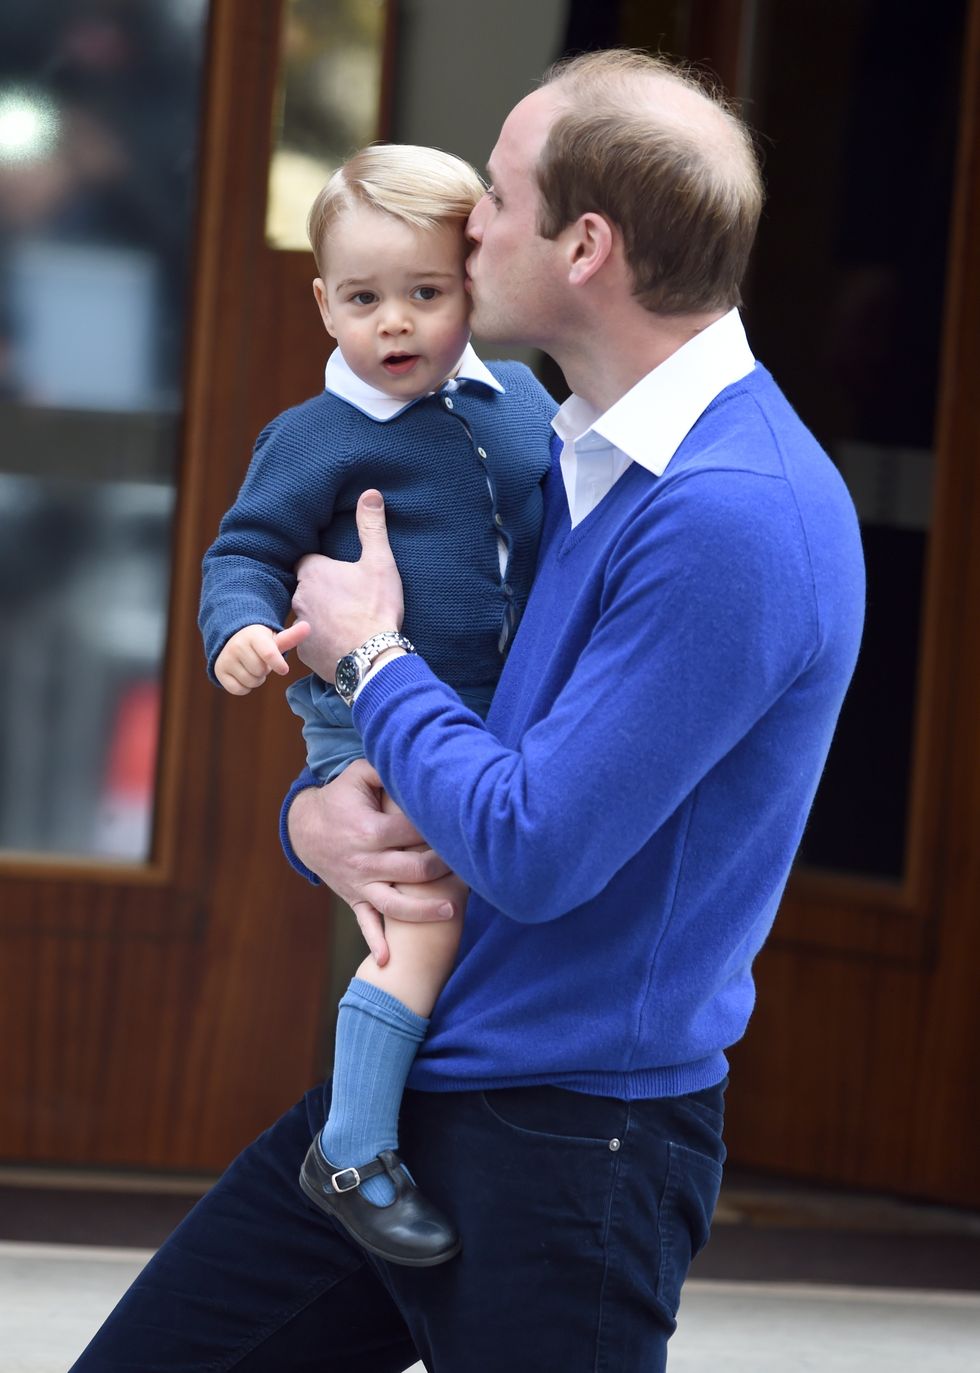 london, england   may 02  prince william, duke of cambridge, and prince george arrive at the lindo wing at st marys hospital on may 02, 2015 in london, england  the duchess of cambridge was safely delivered a daughter at 834am this morning weighing 8lbs 3oz photo by anwar husseinwireimage